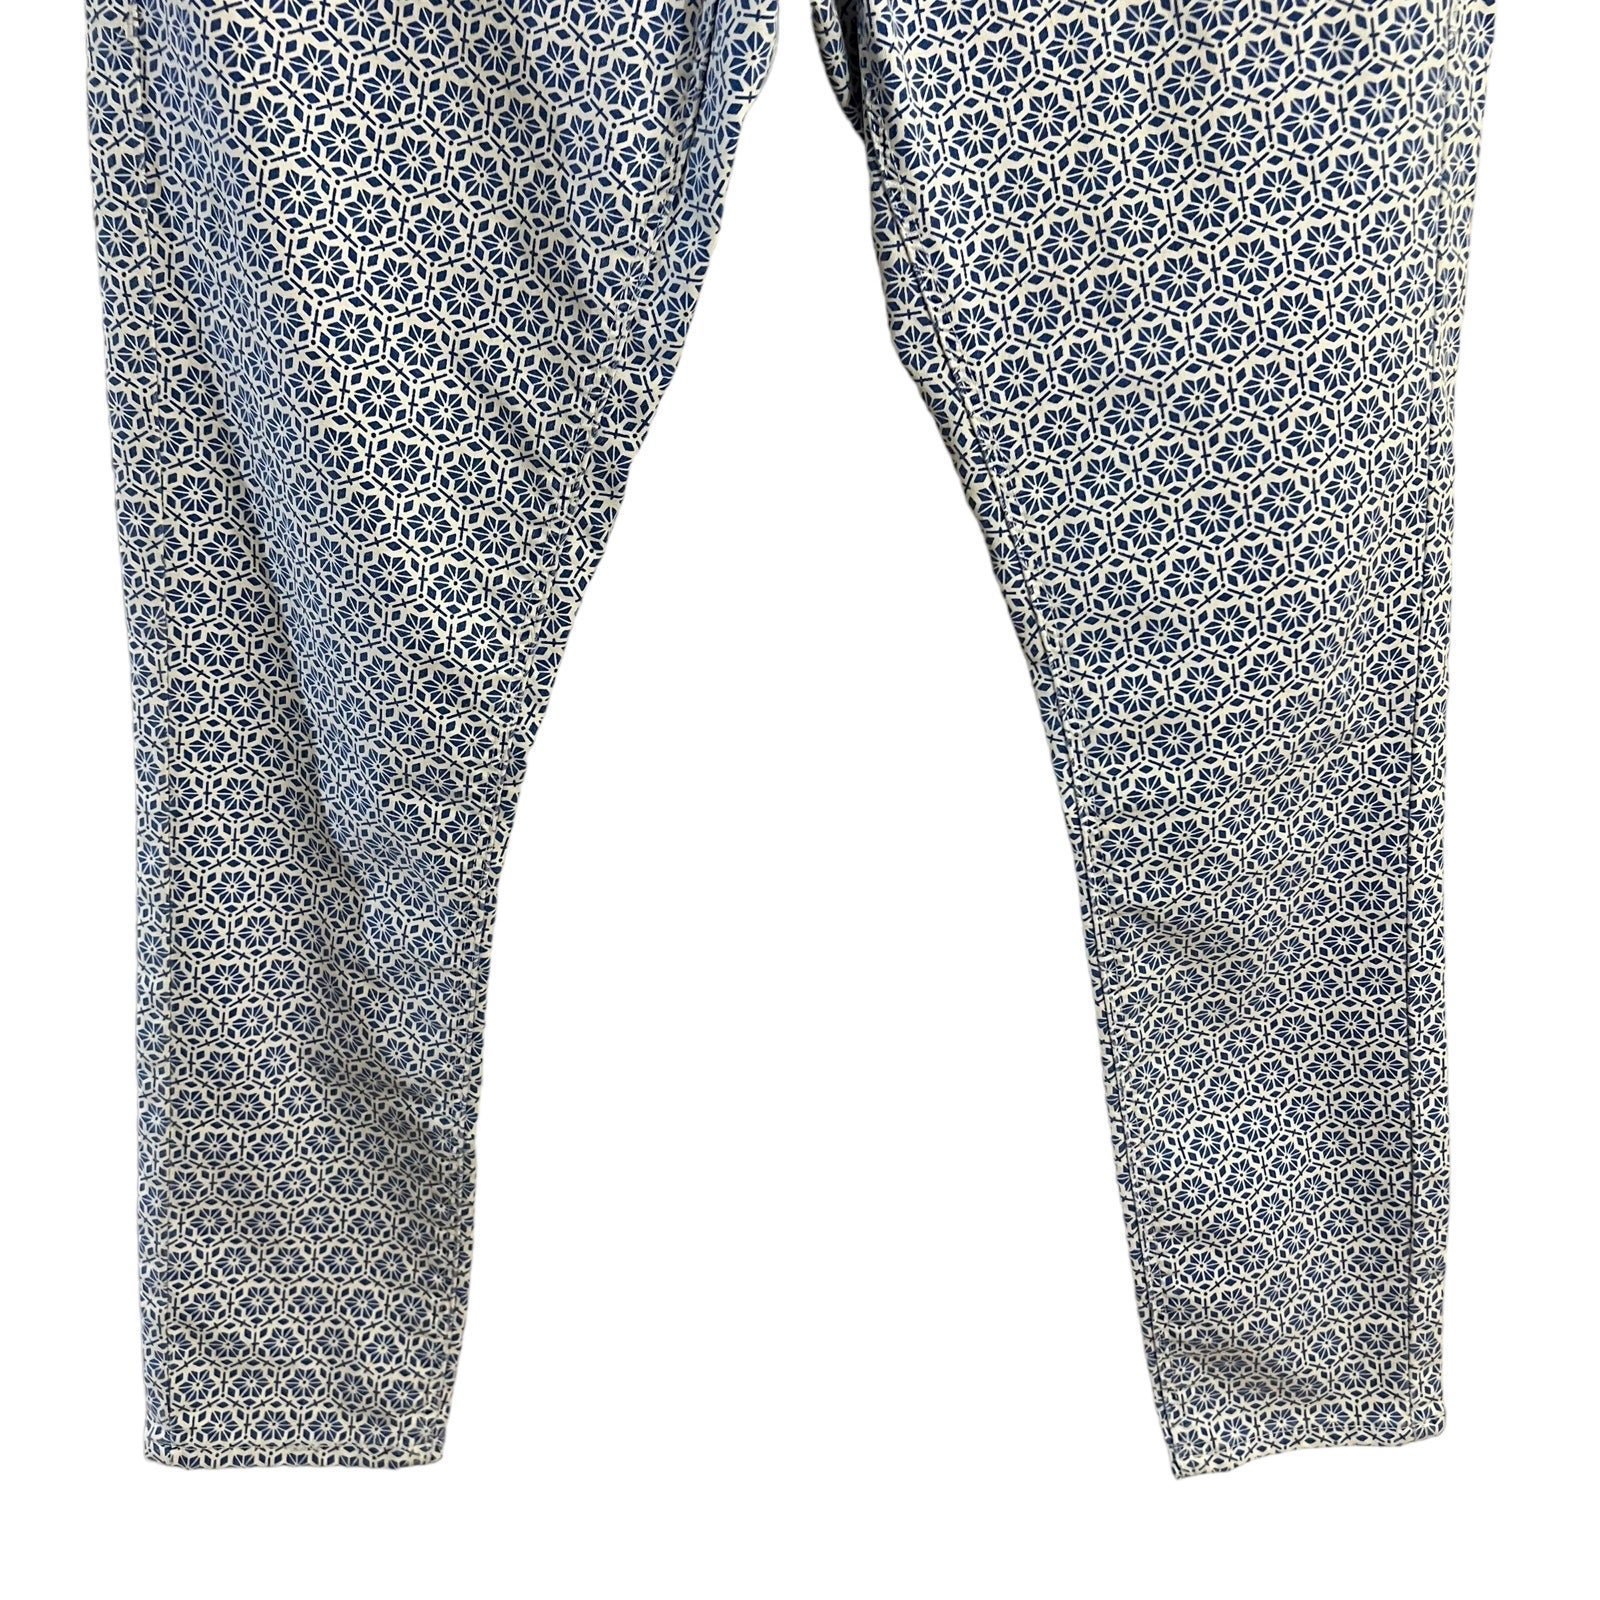 Personality TopShop Moto Leigh Pants W30 Blue and White Geometric Pattern Skinny Leg Pants KqS0RpUUp Online Exclusive